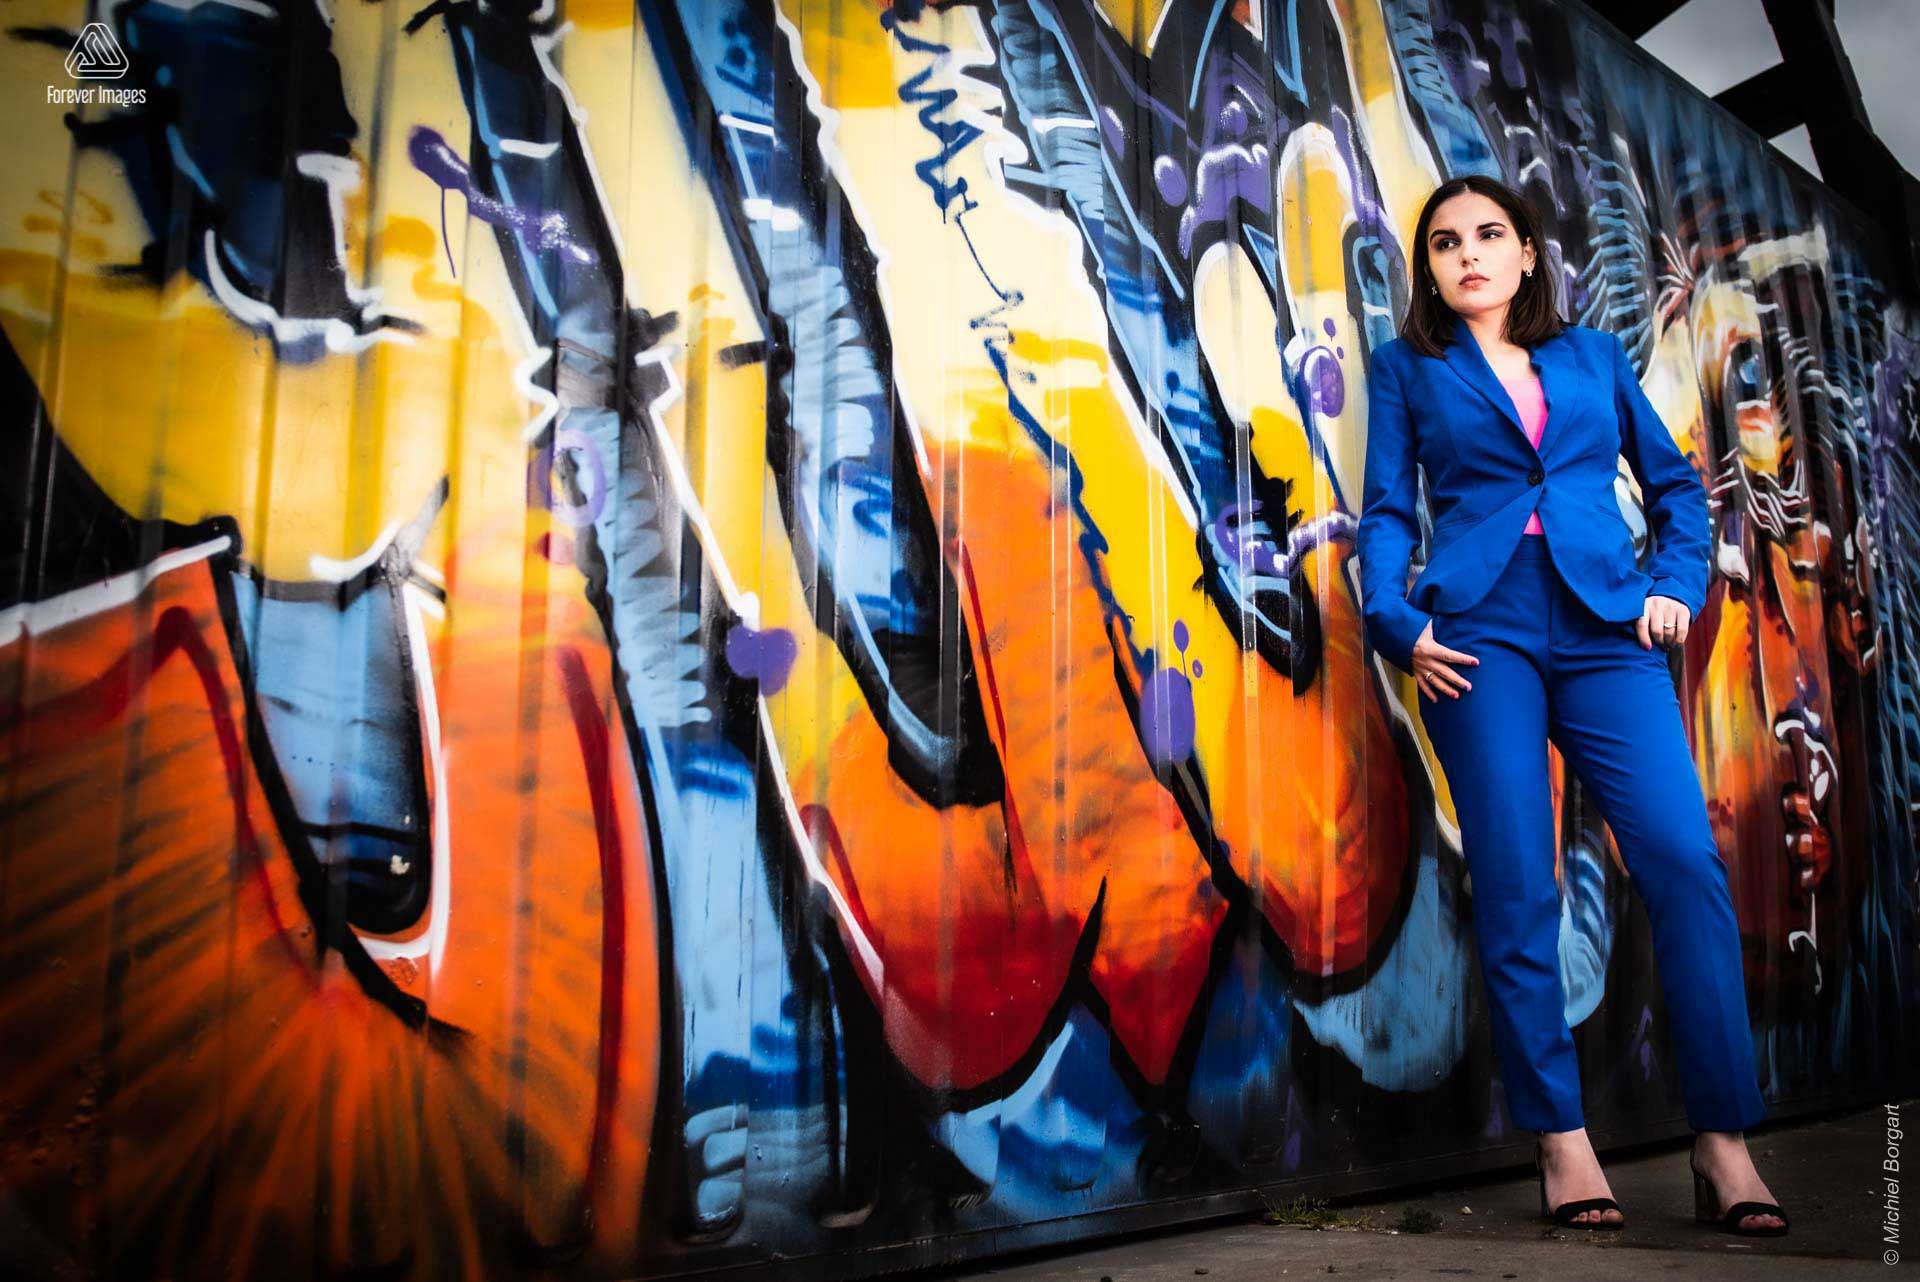 Portrait photo of a lady in blue suit graffiti sea container | Isis Vaandrager NDSM Werf Amsterdam | Portrait Photographer Michiel Borgart - Forever Images.